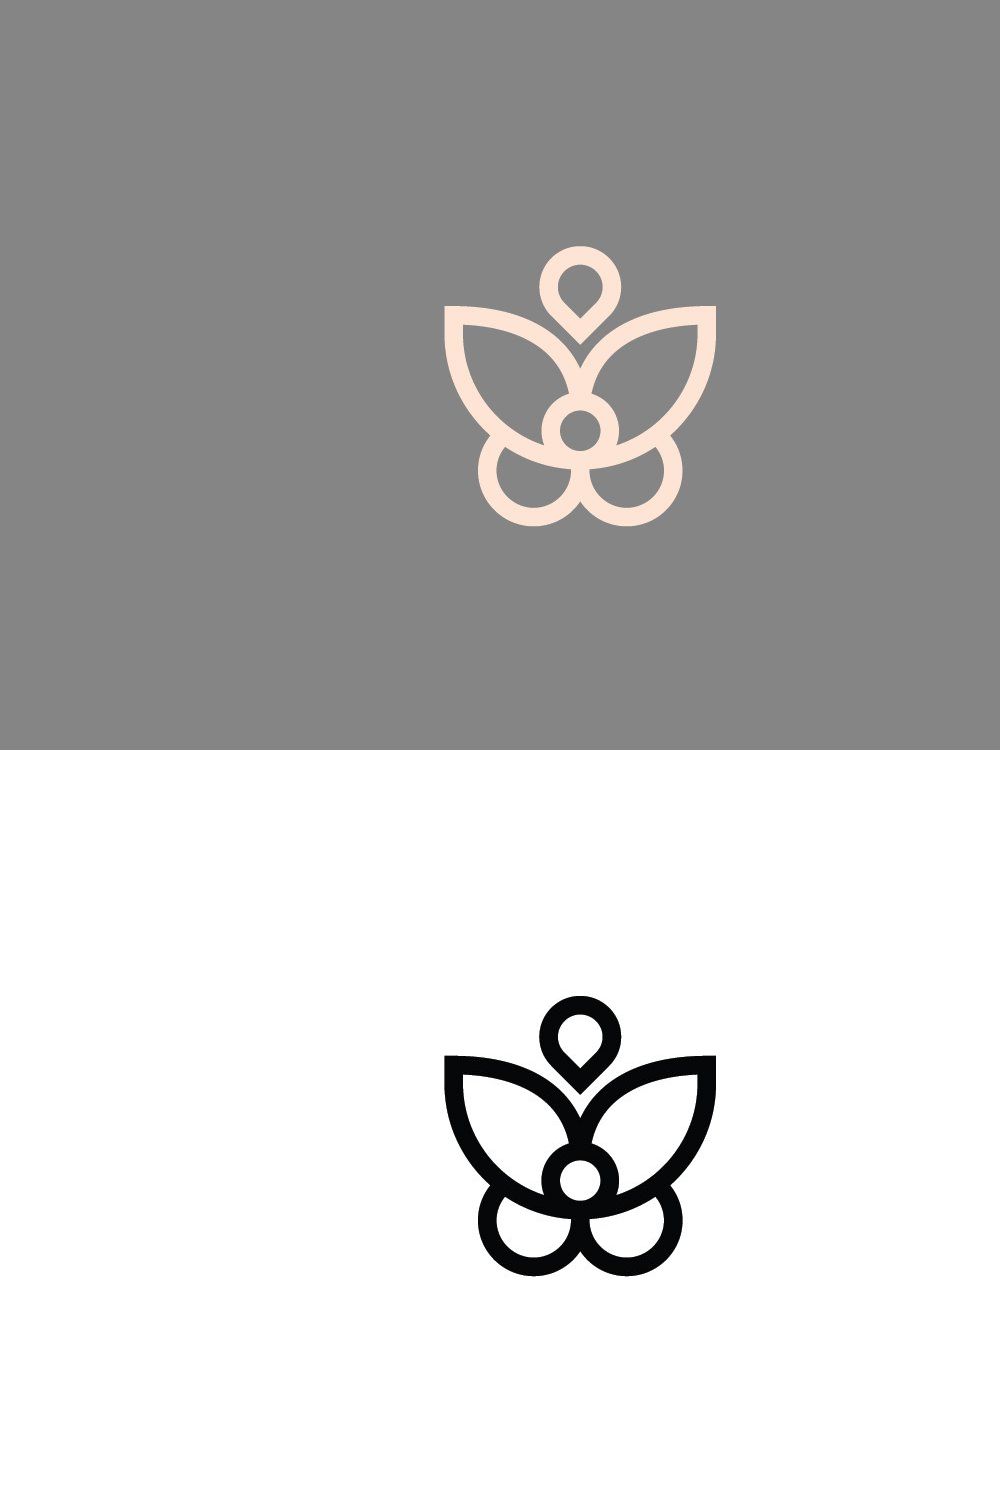 Butterfly Logo pinterest preview image.